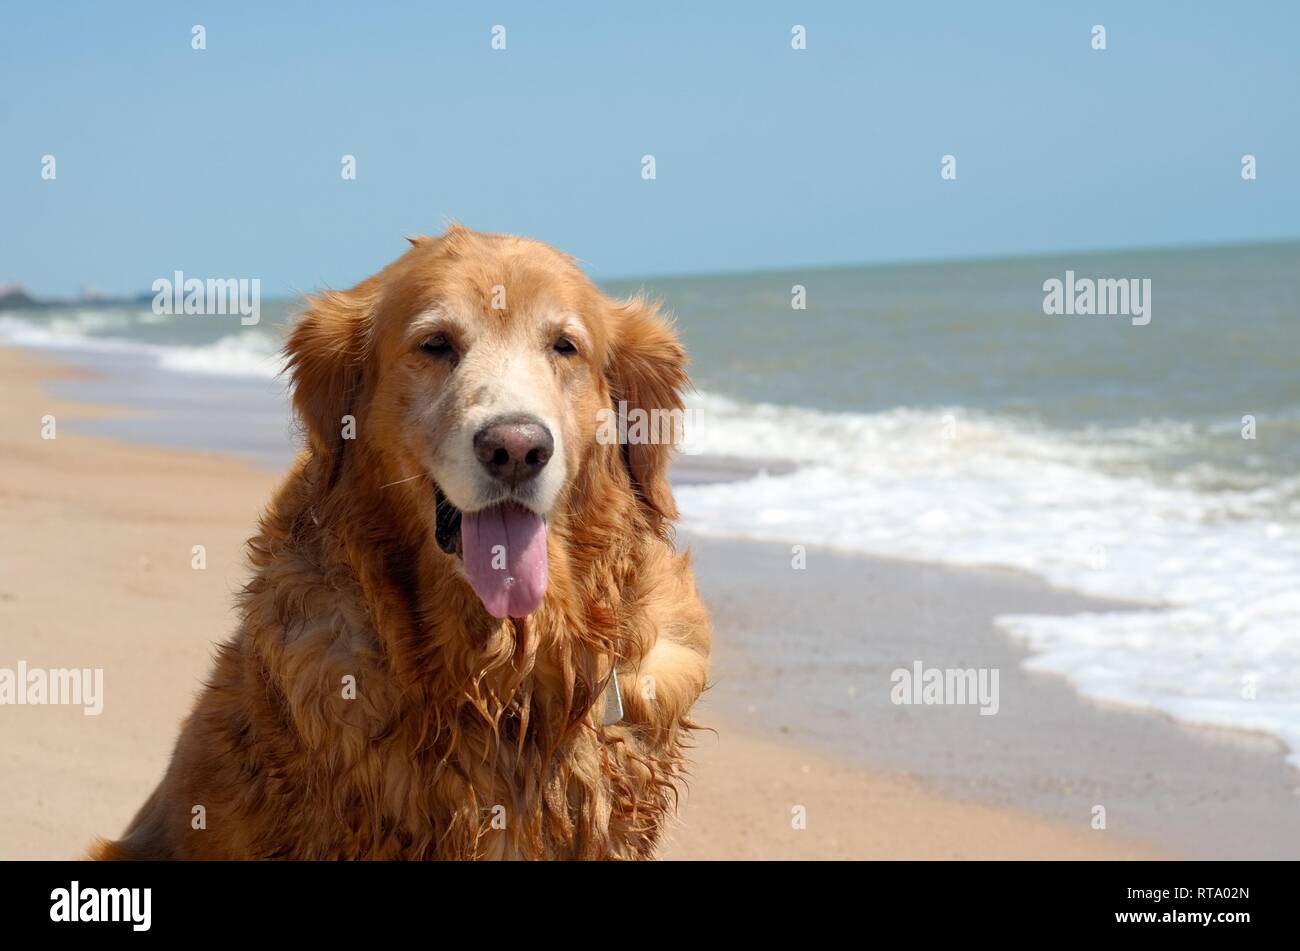 Front view close up picture of a Golden Retriever dog breed sitting on the beach, Thailand Stock Photo